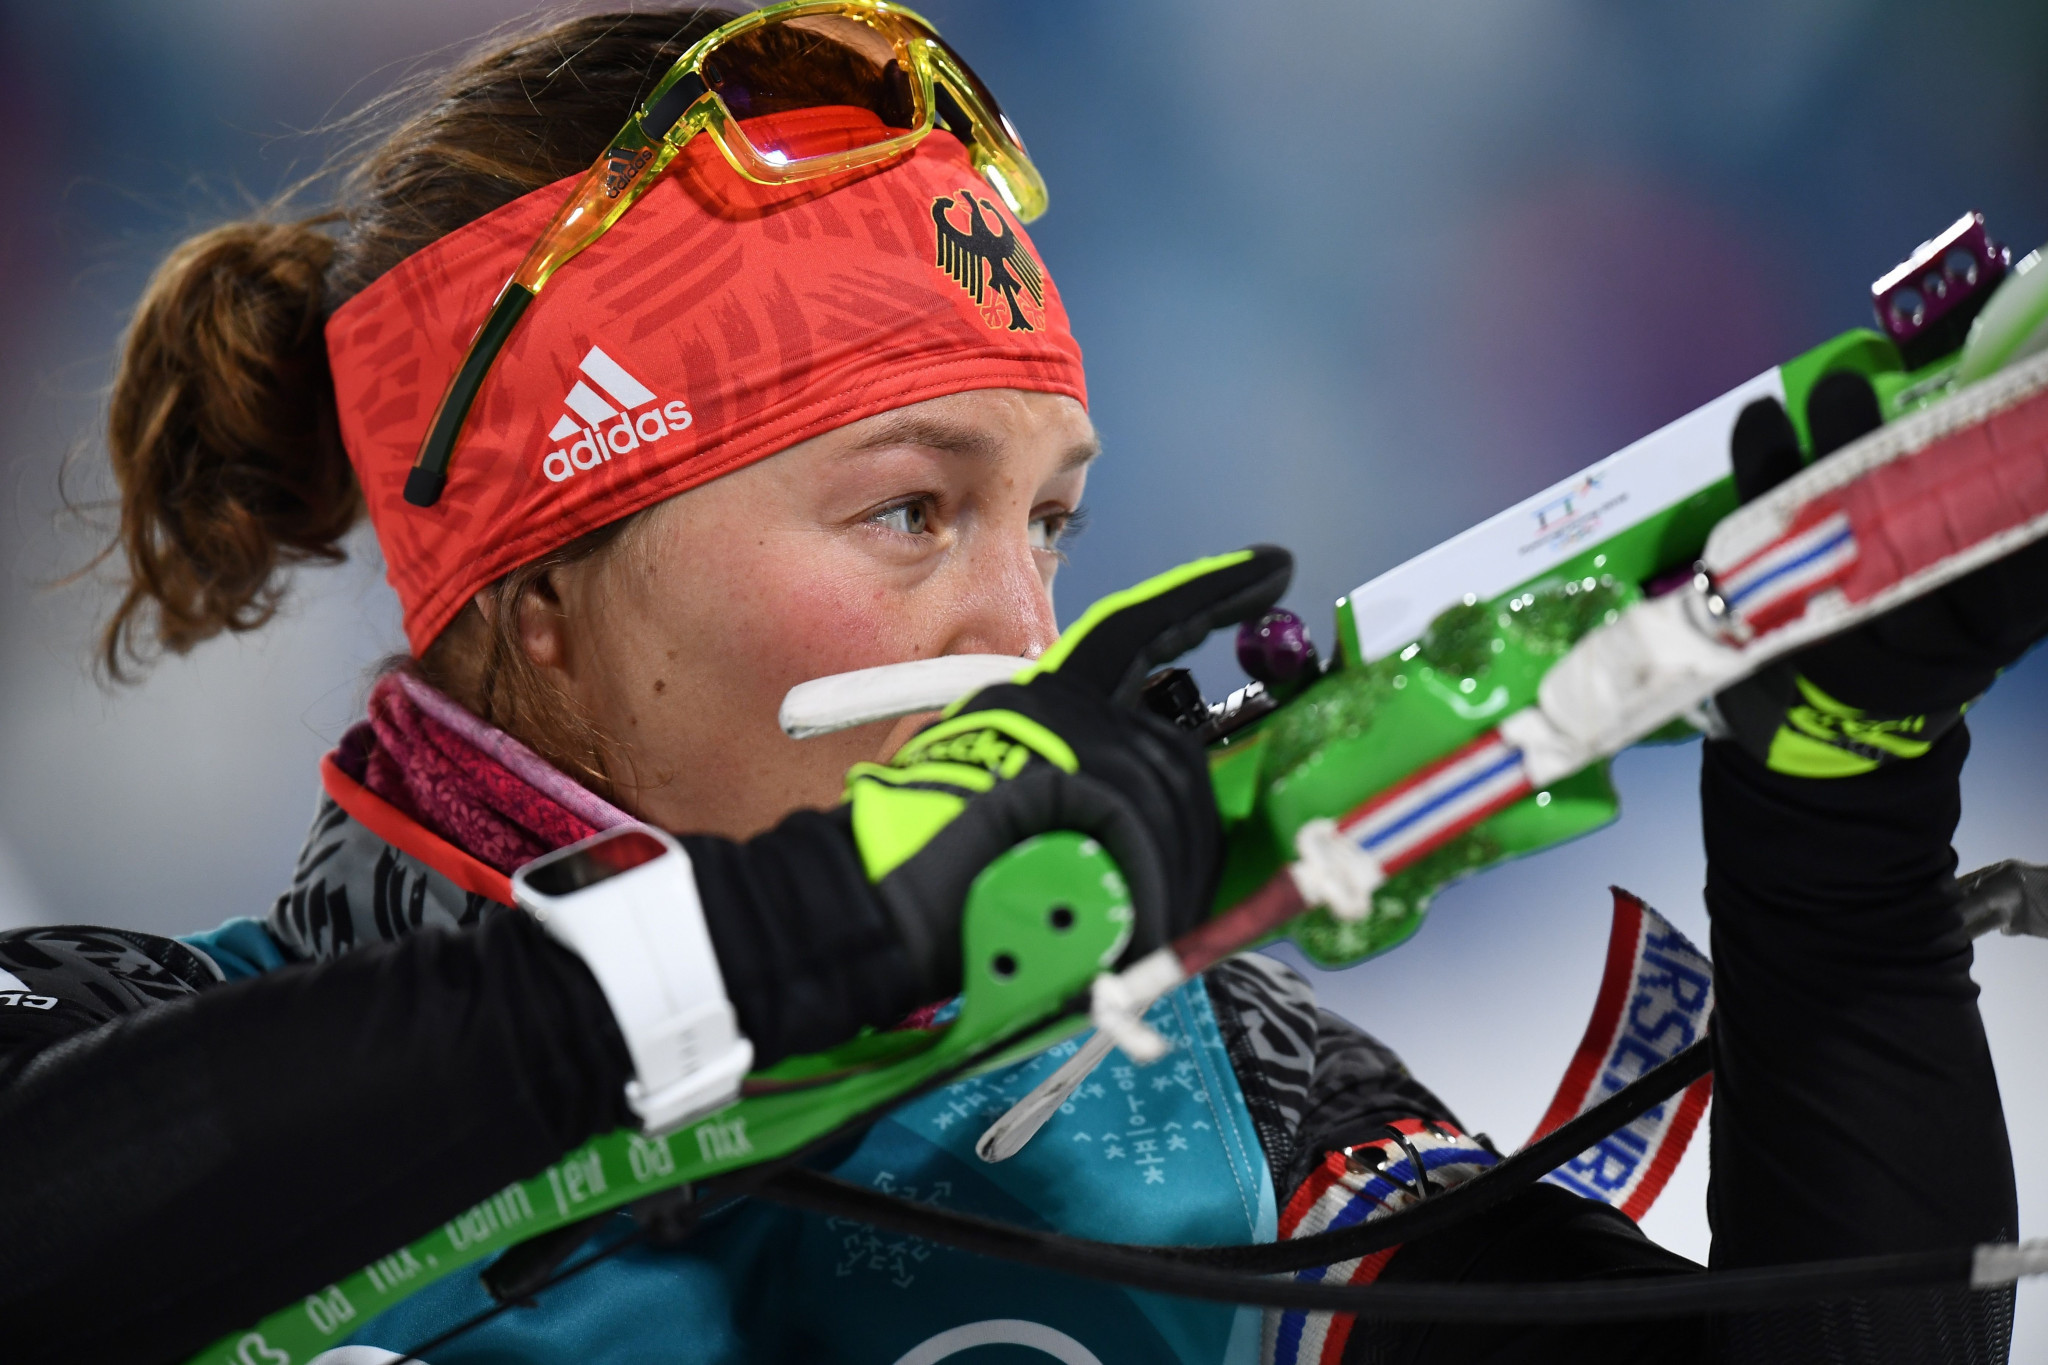 German biathlete Laura Dahlmeier sealed her maiden Olympic crown with victory in the women's 7.5km sprint event ©Getty Images